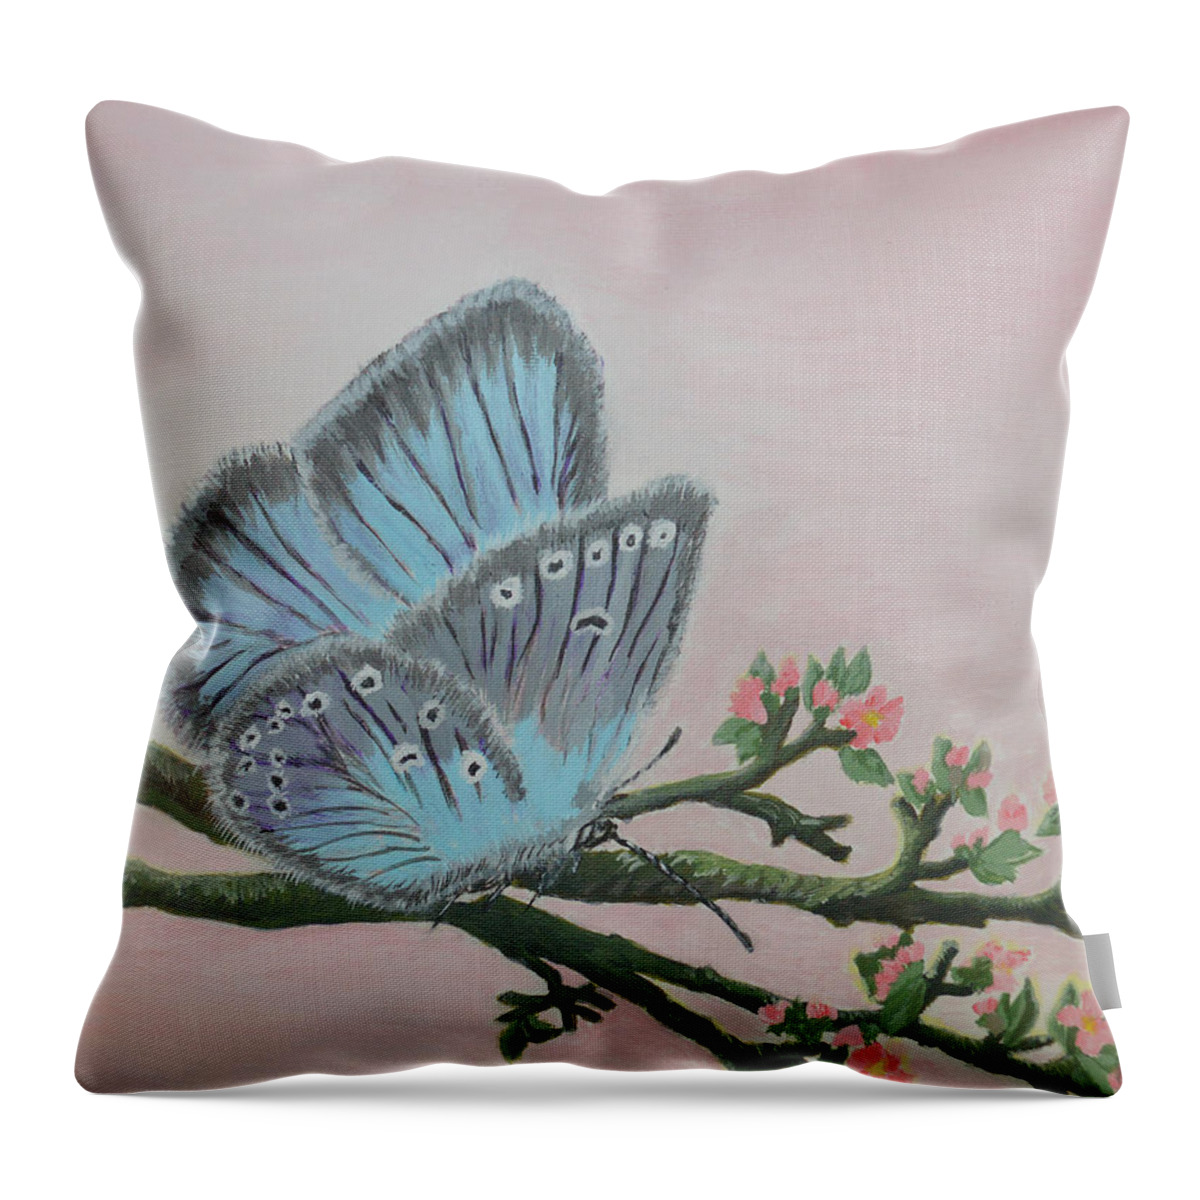 Colorful Throw Pillow featuring the painting Amandas Blue by Felicia Tica